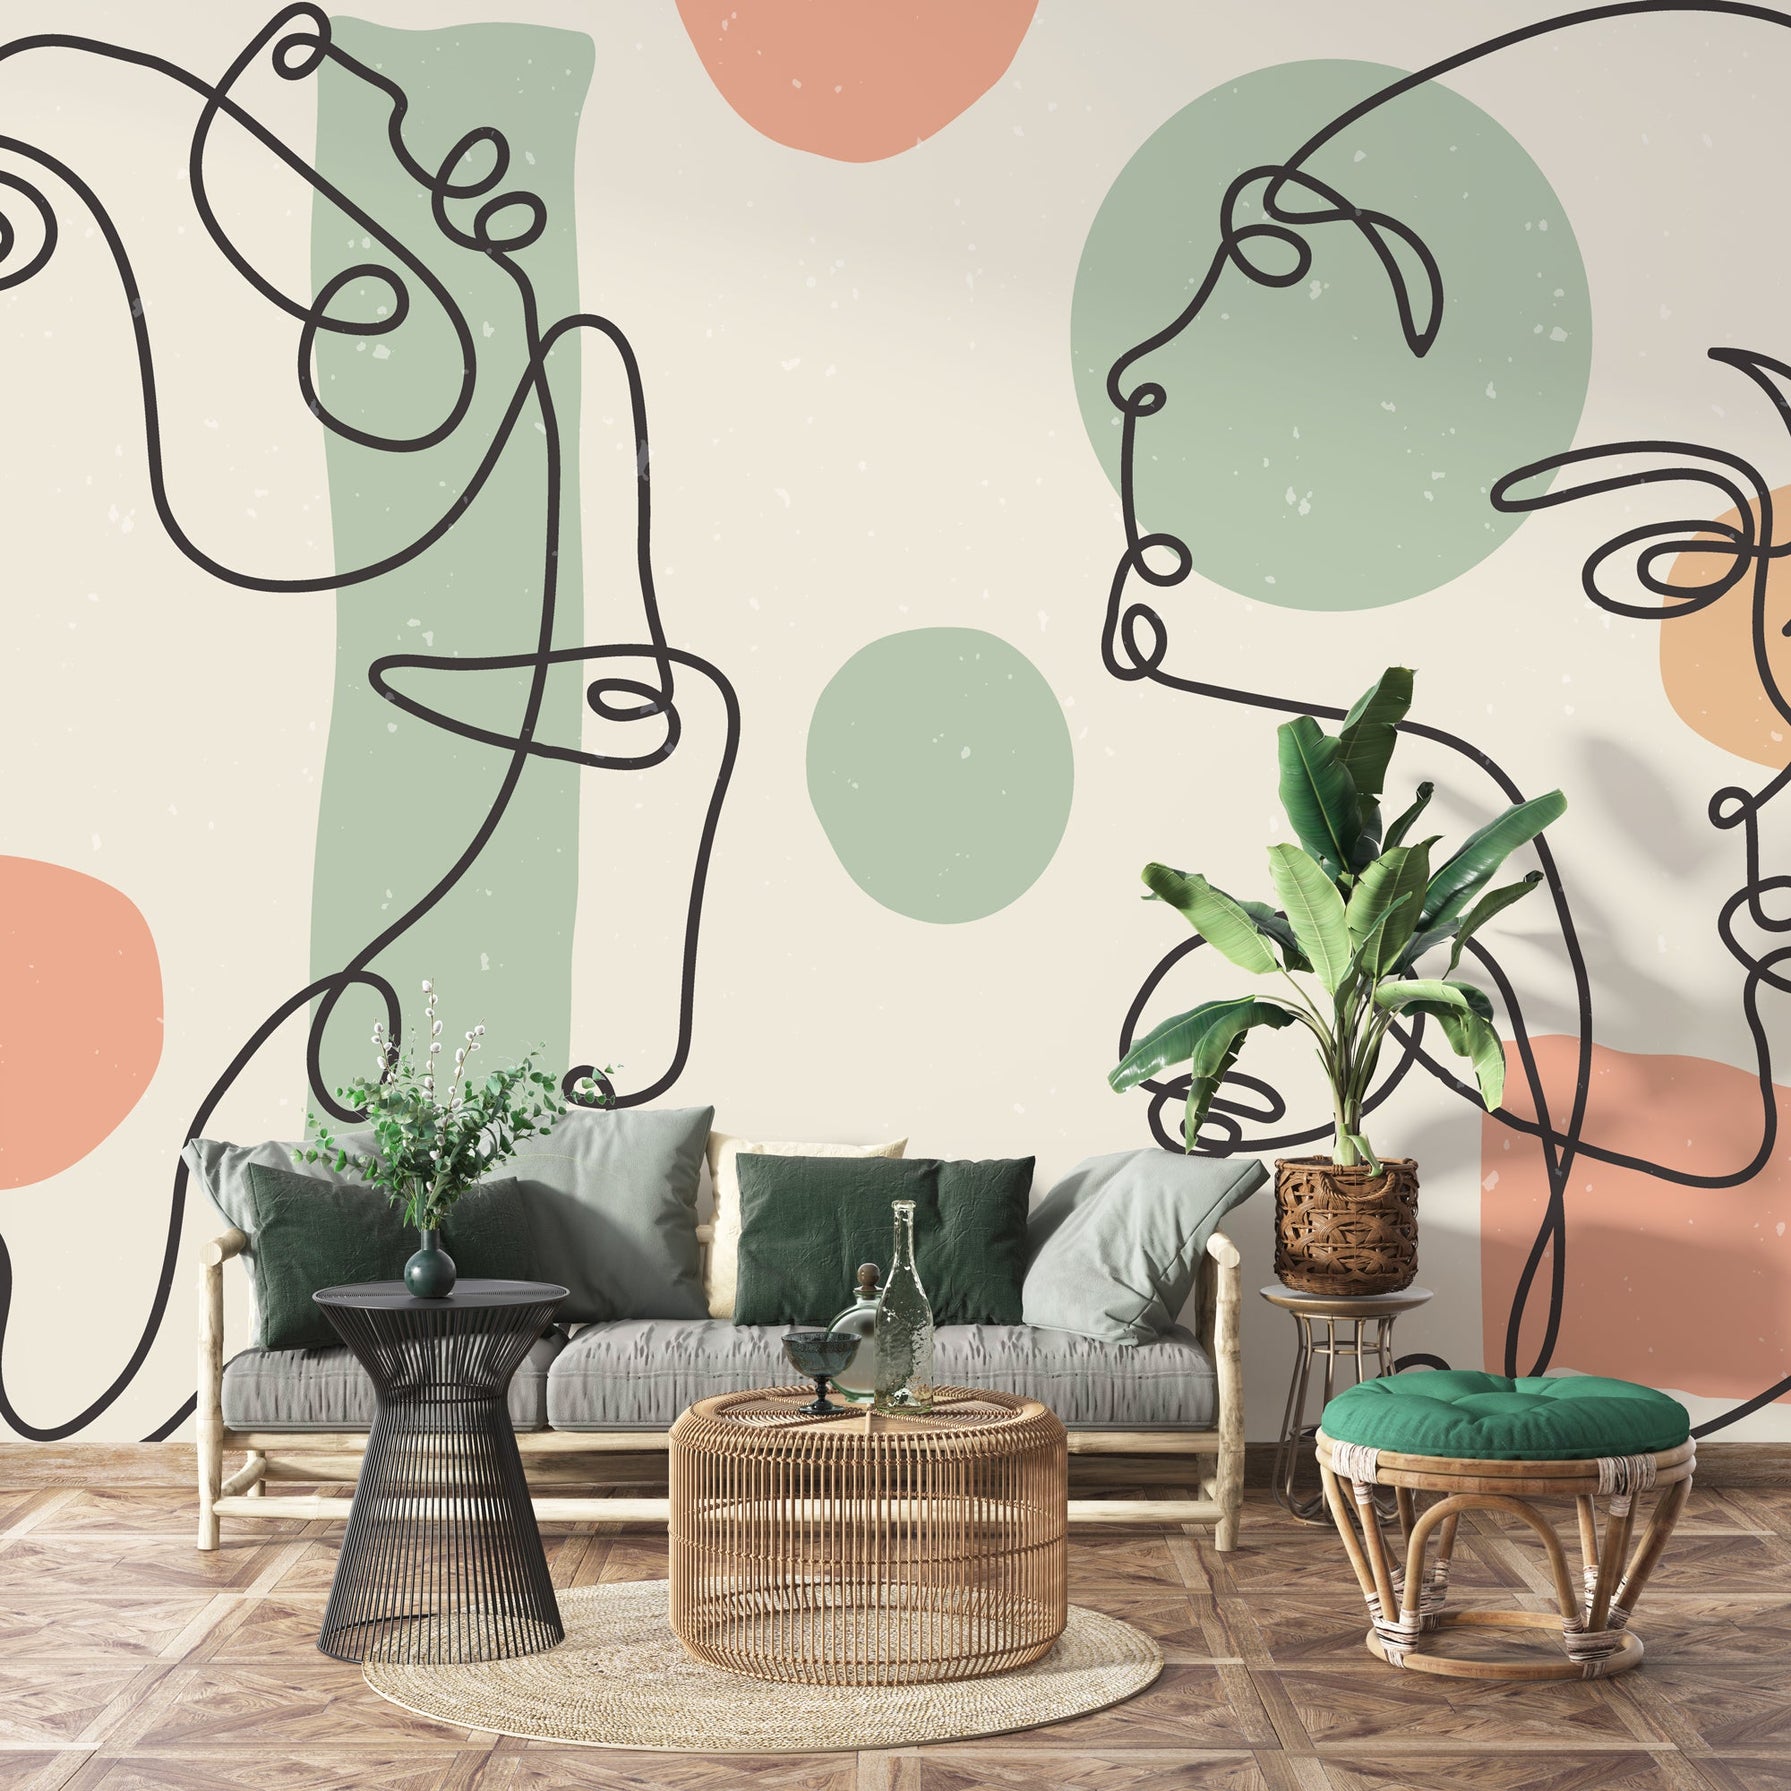 Boho Matisse Wallpaper Mural: Stylish and Artistic Décor